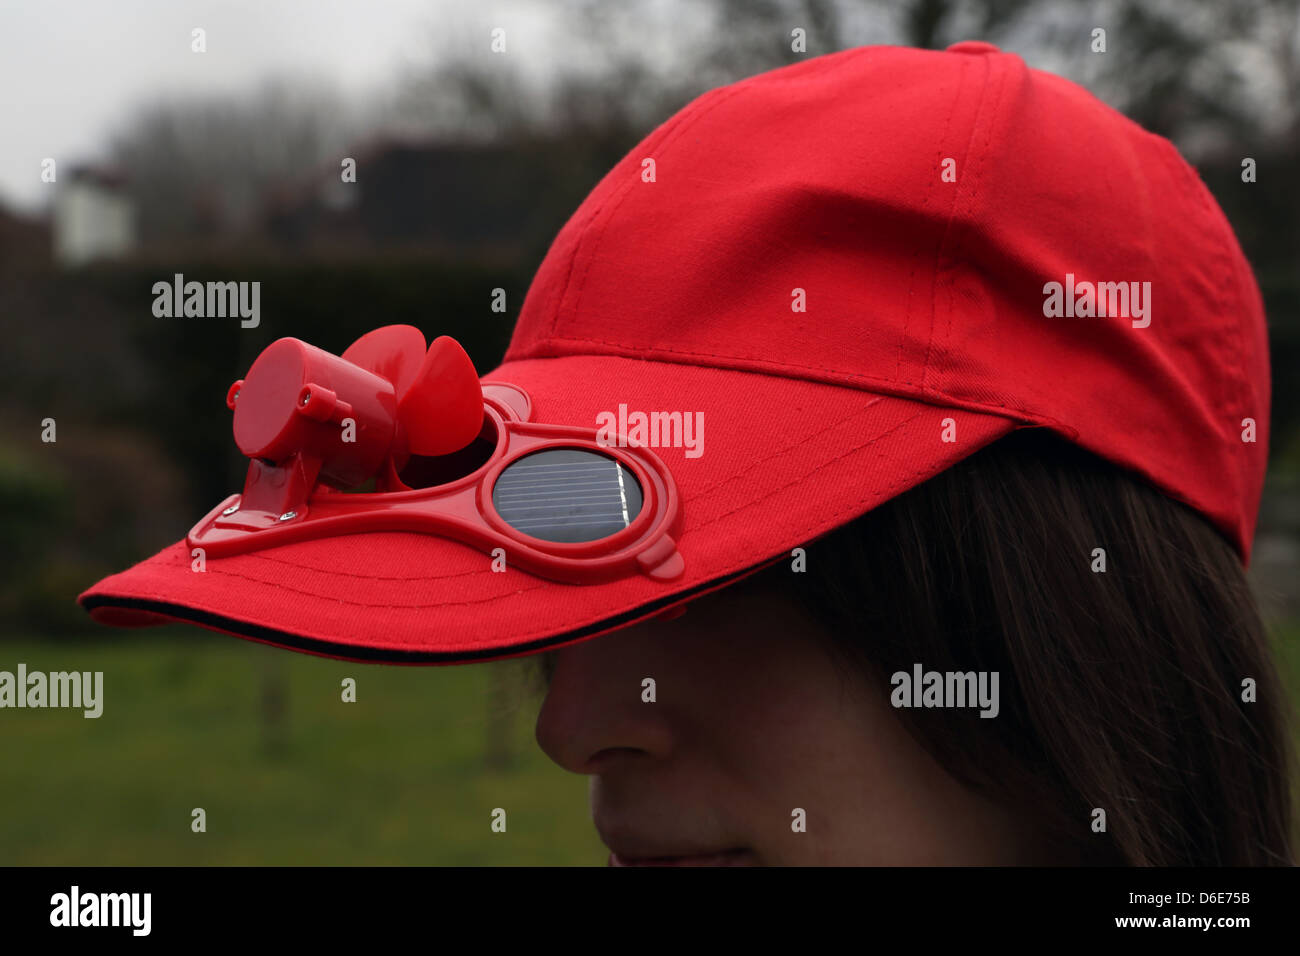 Man Wearing Red Baseball Cap With Solar Powered Fan Stock Photo - Alamy